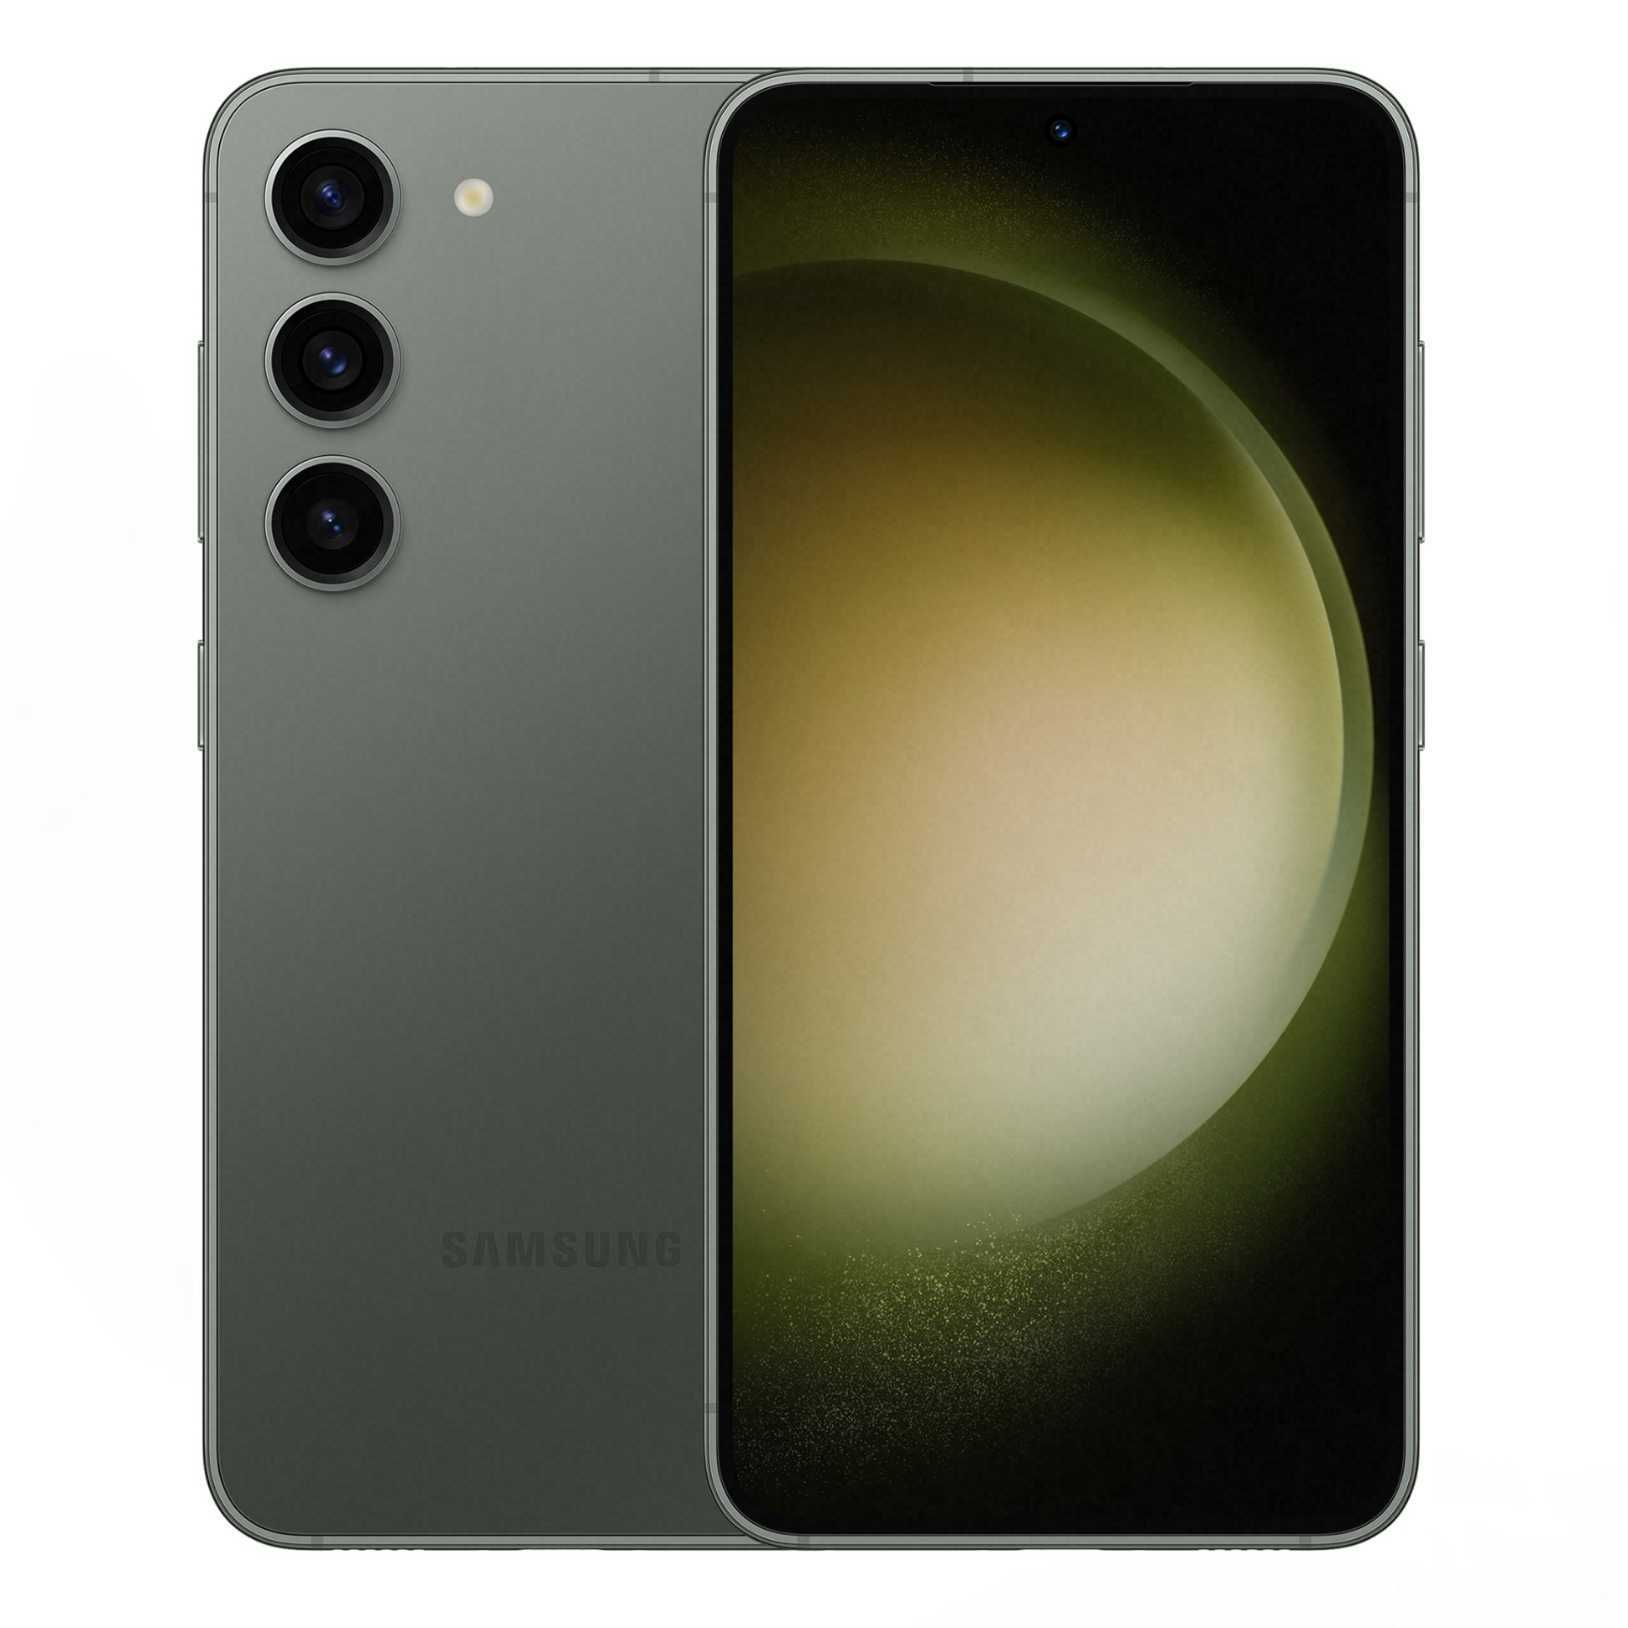 Official render of the Galaxy S23 in green